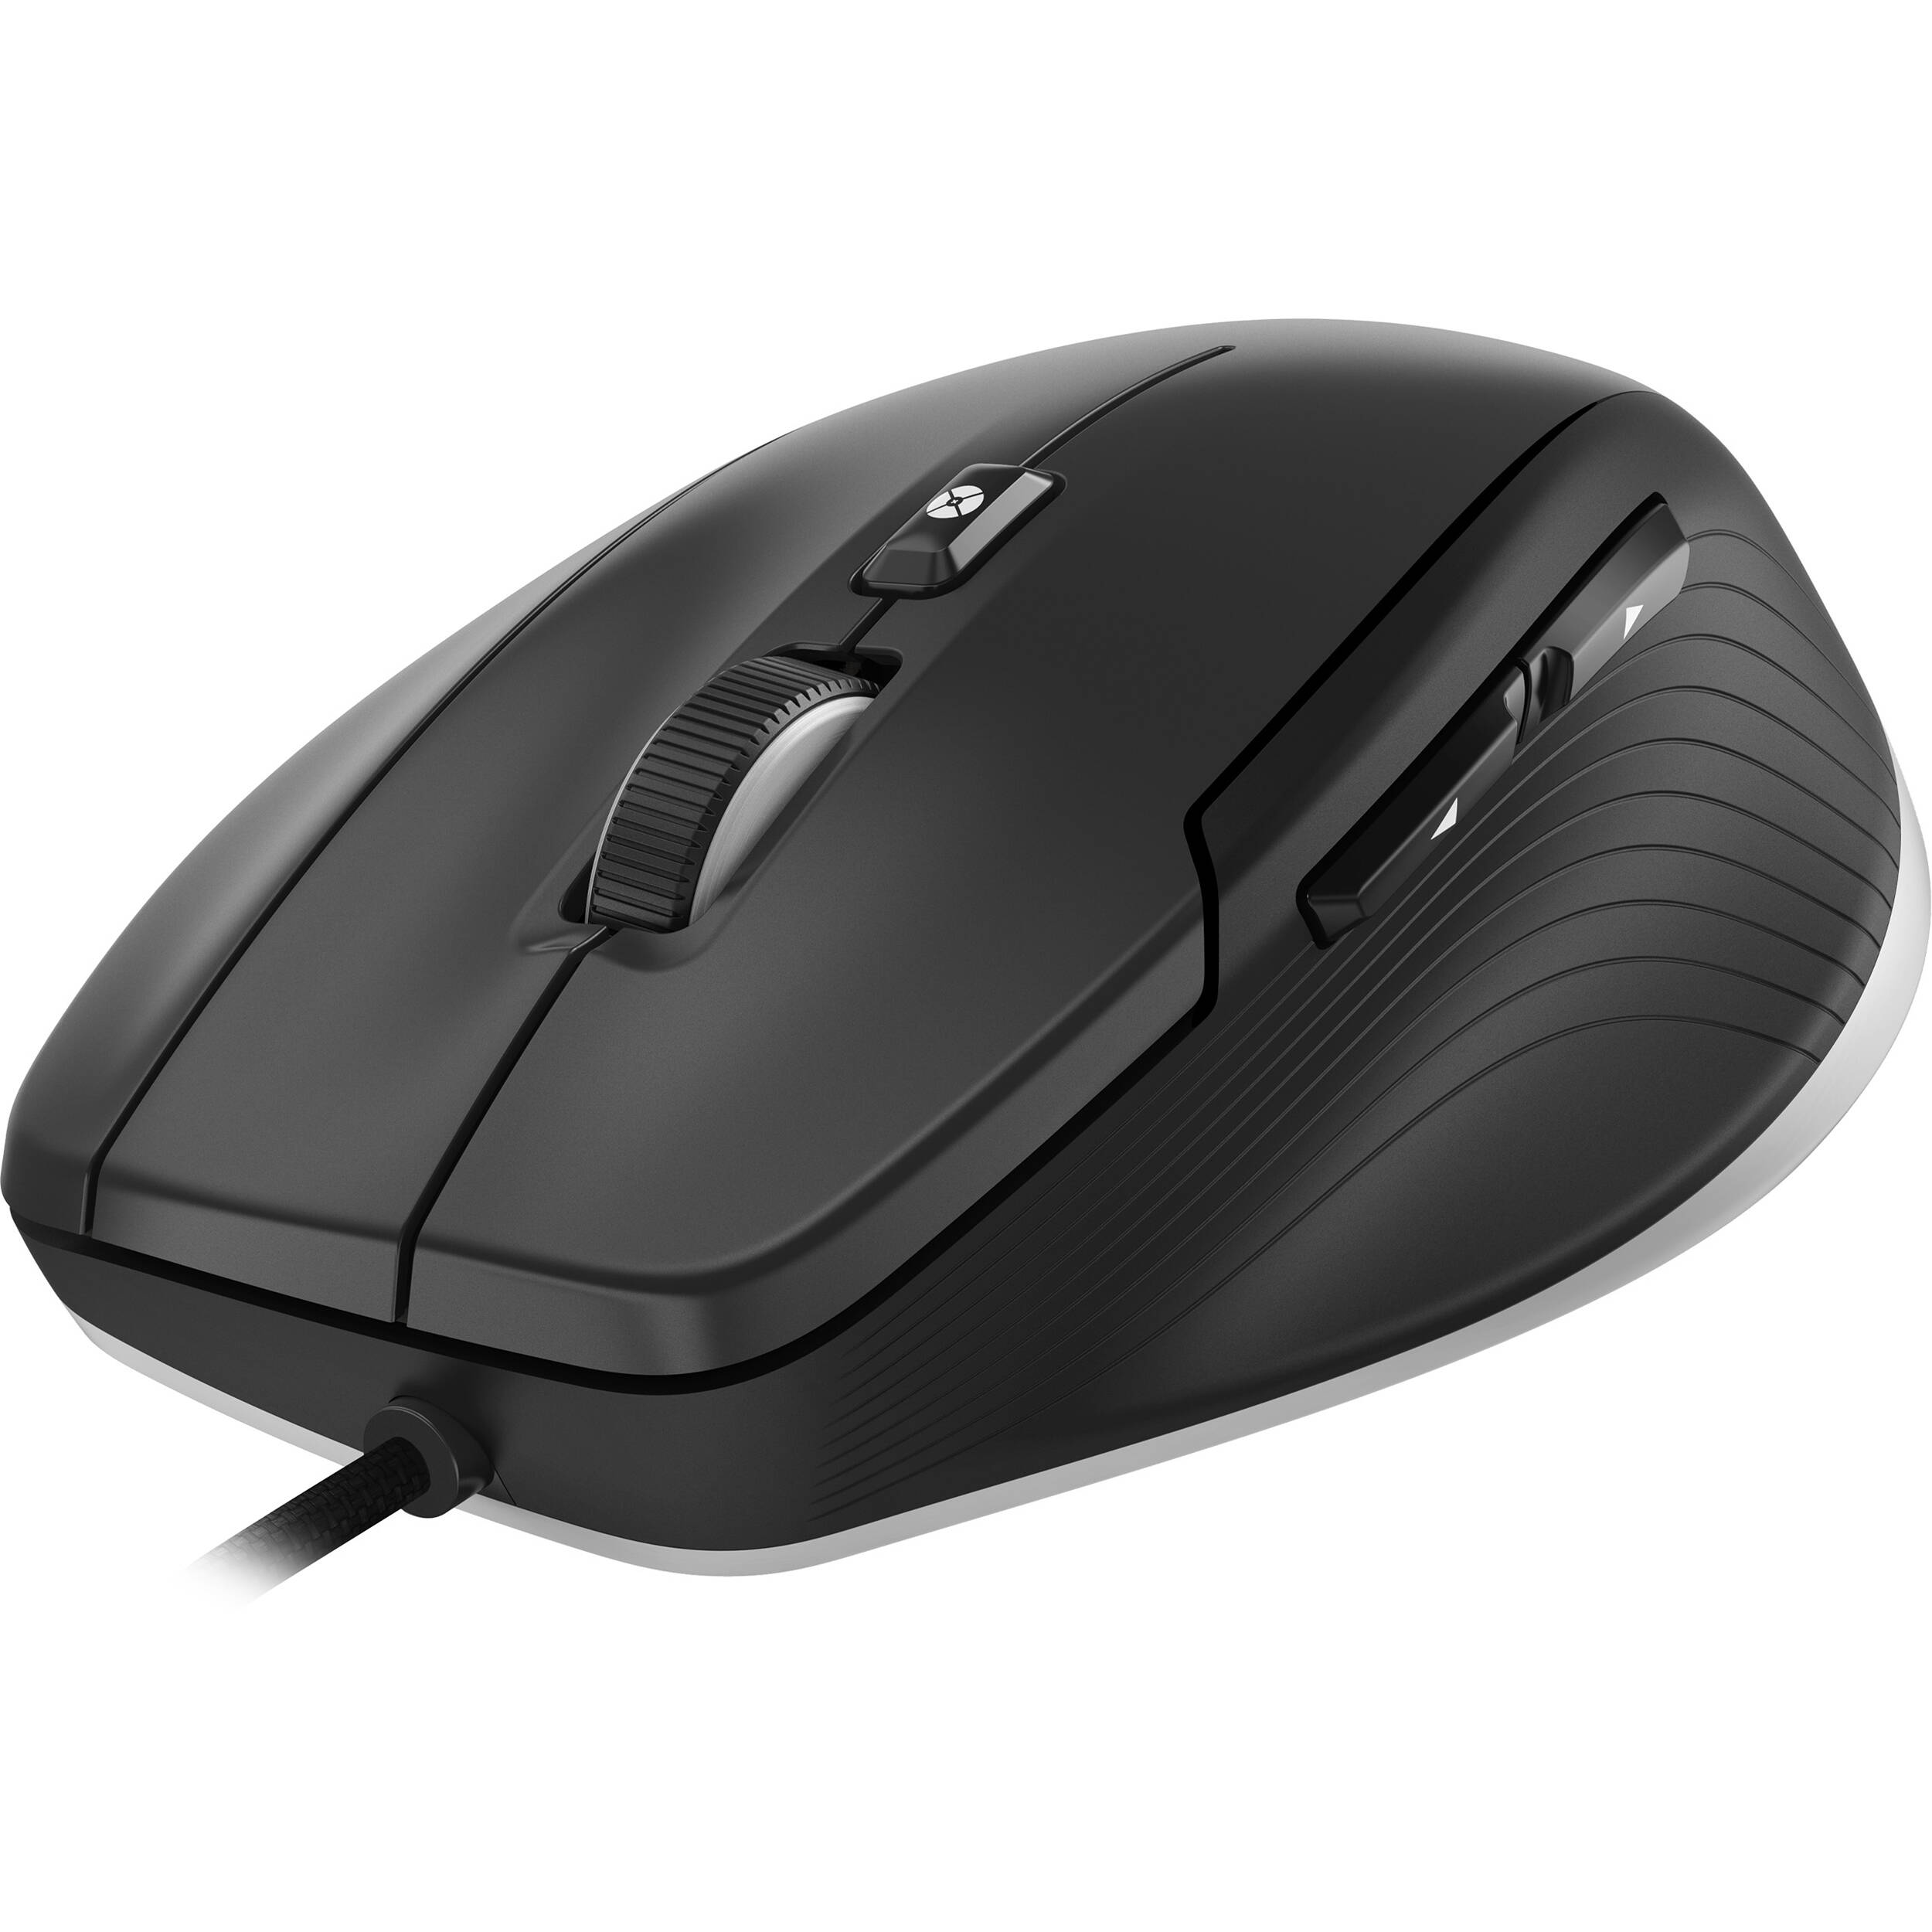 3Dconnexion CadMouse Compact Wired Mouse